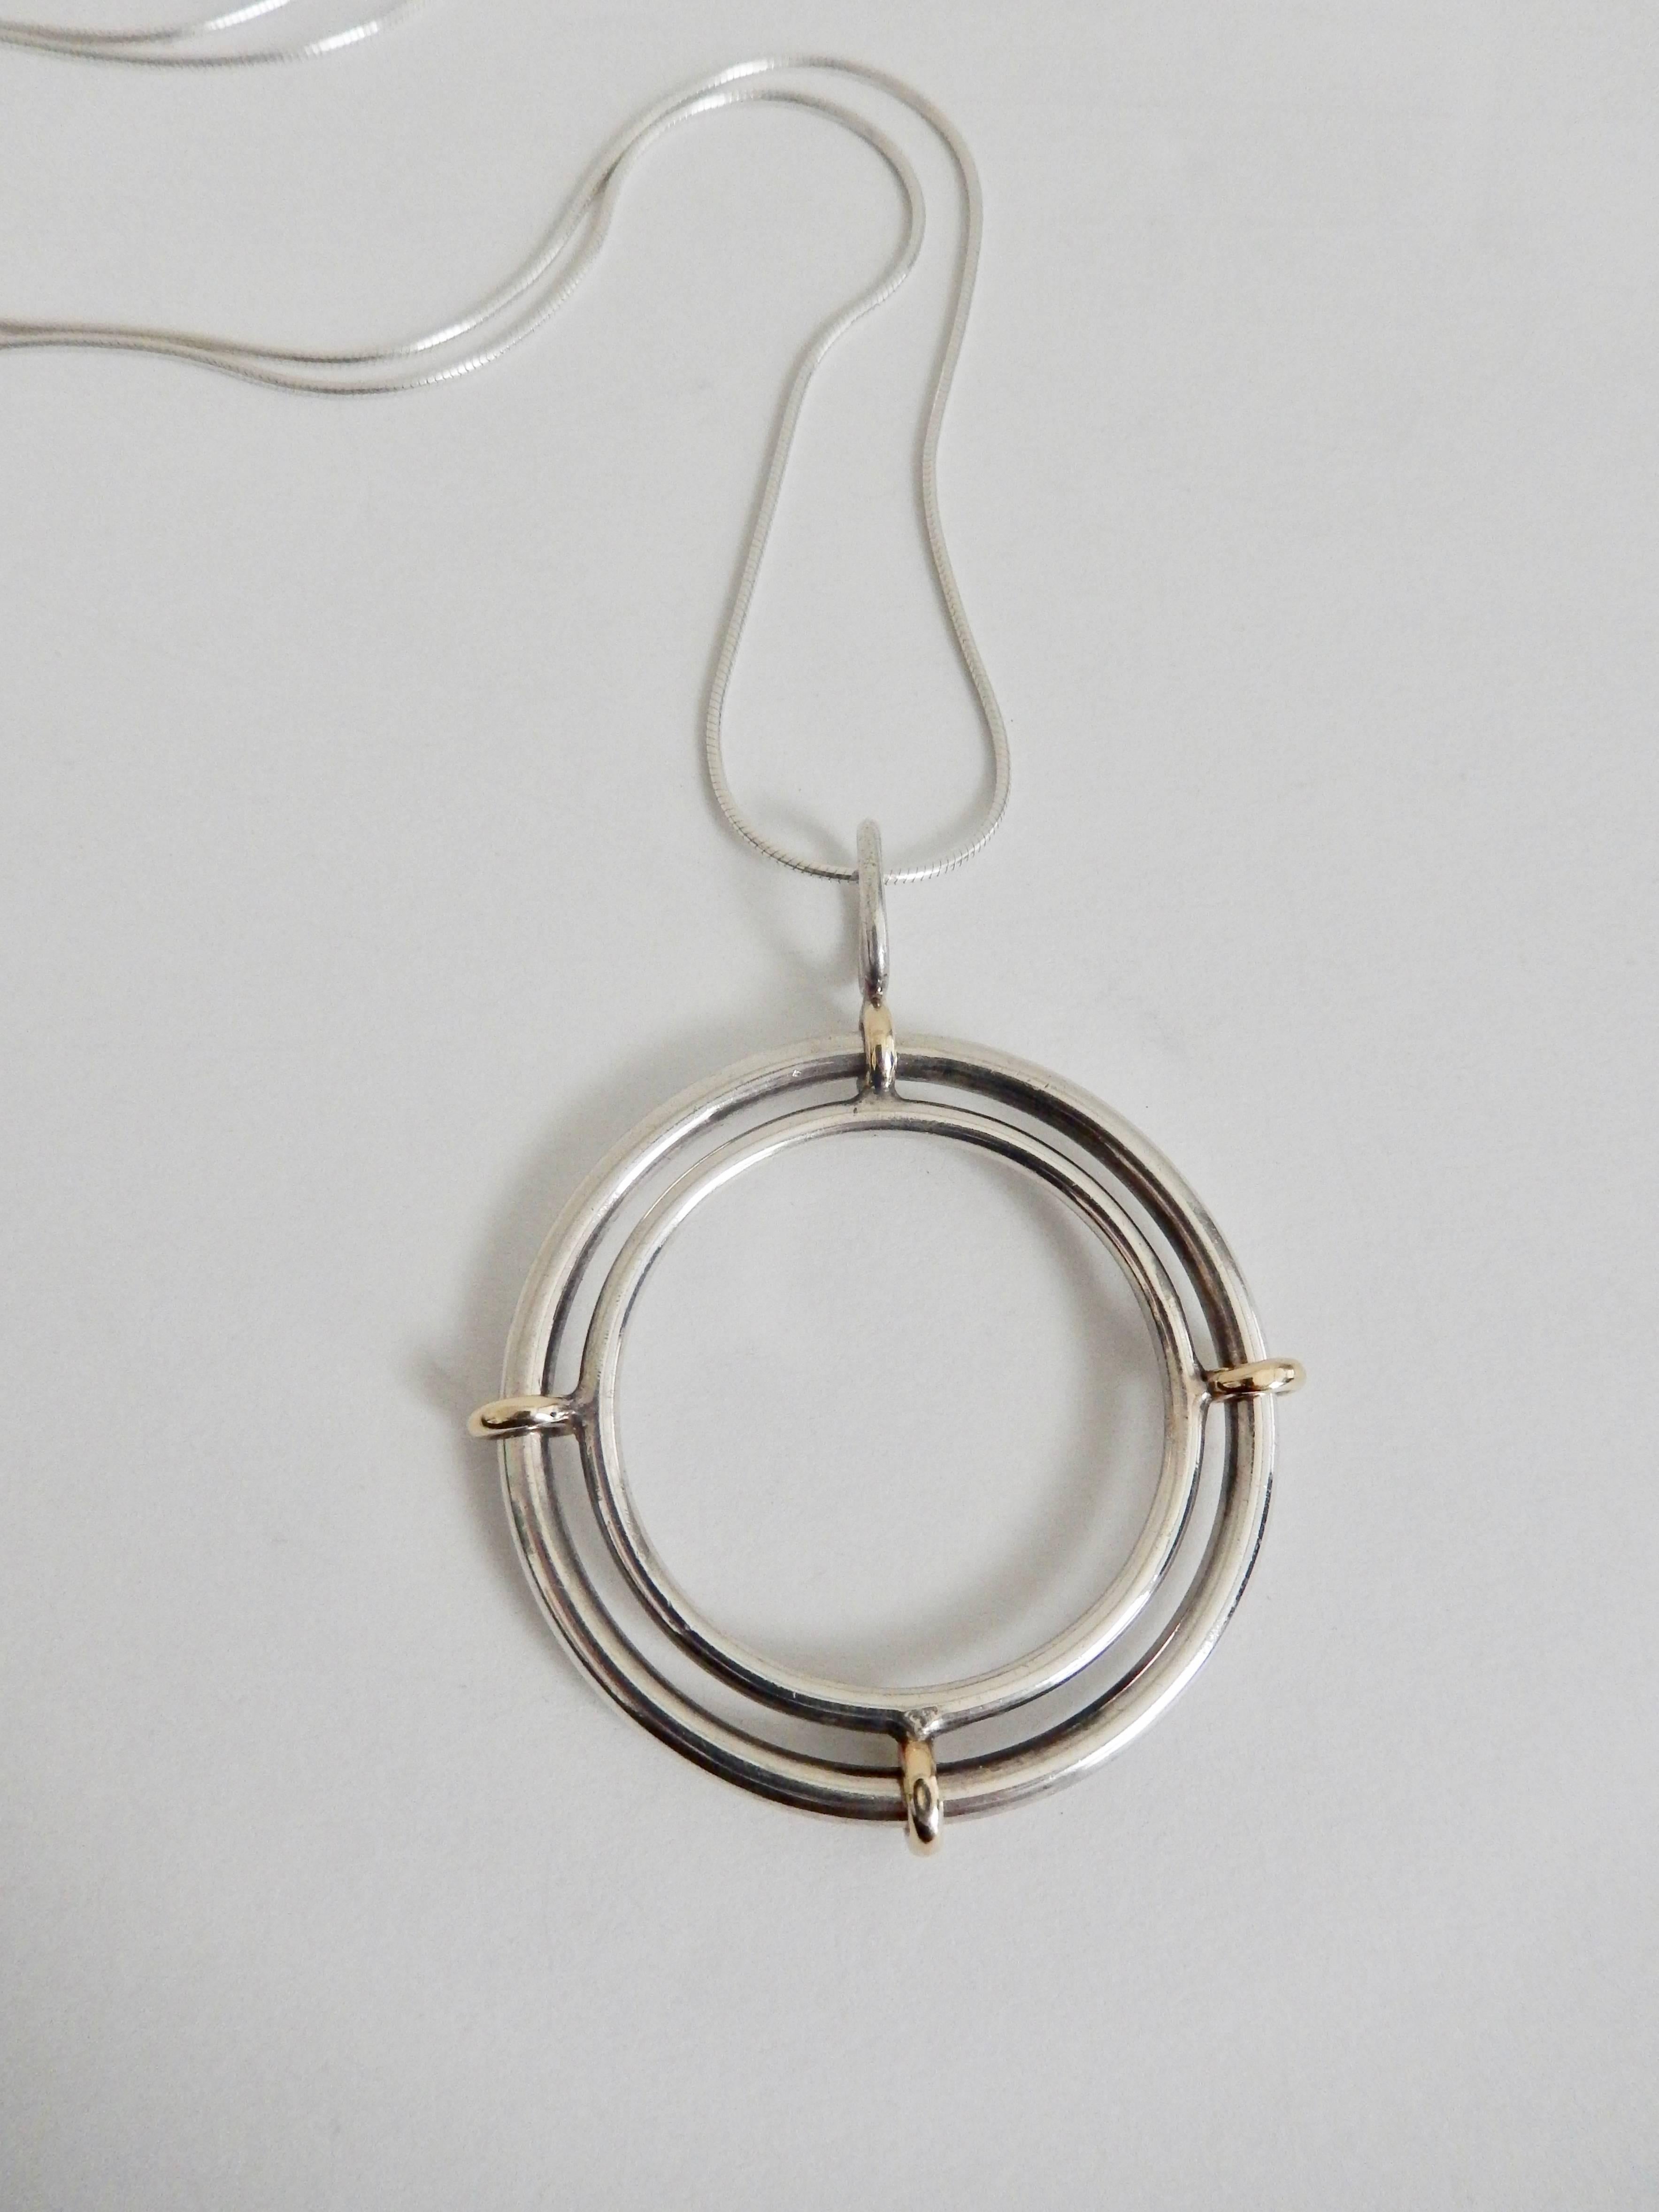 Inspired by the Space Age, a rare sterling and 14K gold pendant by Pierre Cardin (b. 1922) with a moveable outer ring.  Cardin's striking geometric design reflects a minimalist aesthetic, popular in the 1960s and 70s.  A collector's piece.  Signed: